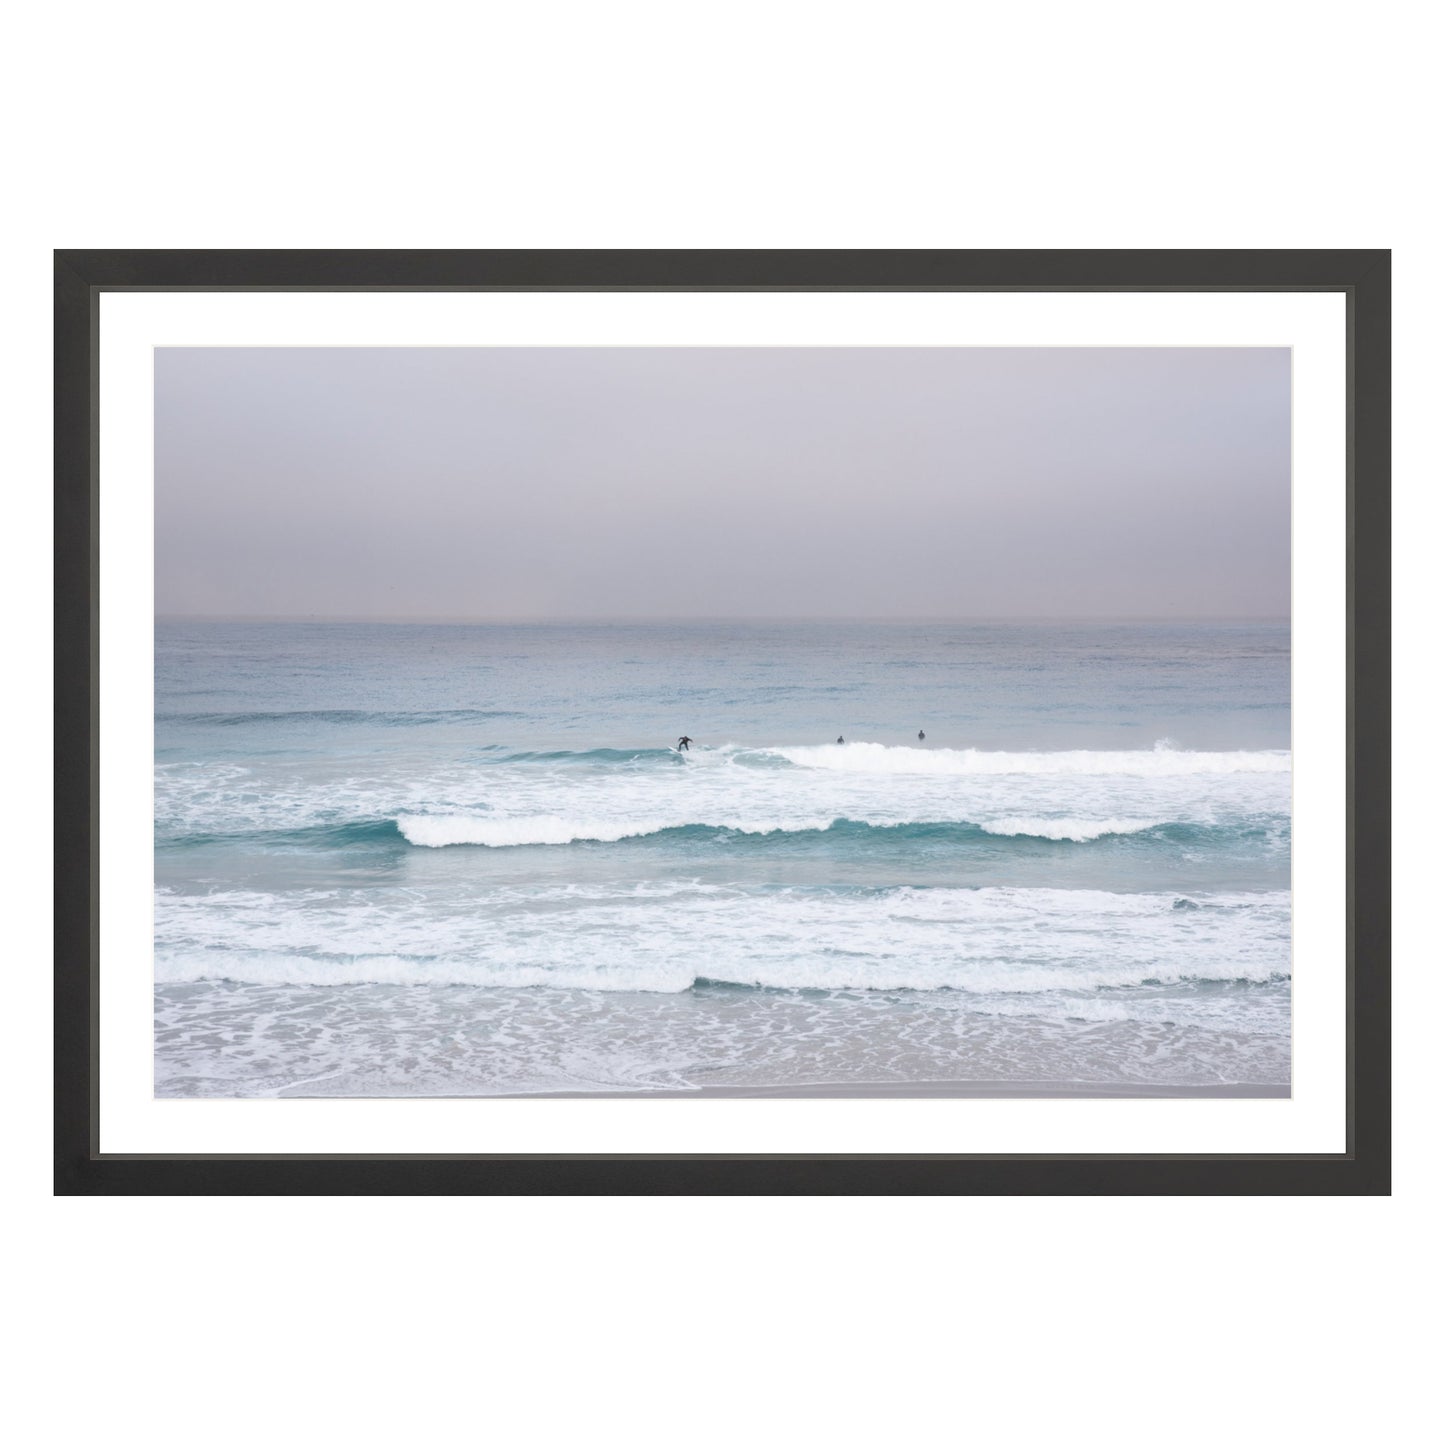 Photograph of surfers on Carmel coast, California framed in black with white mat